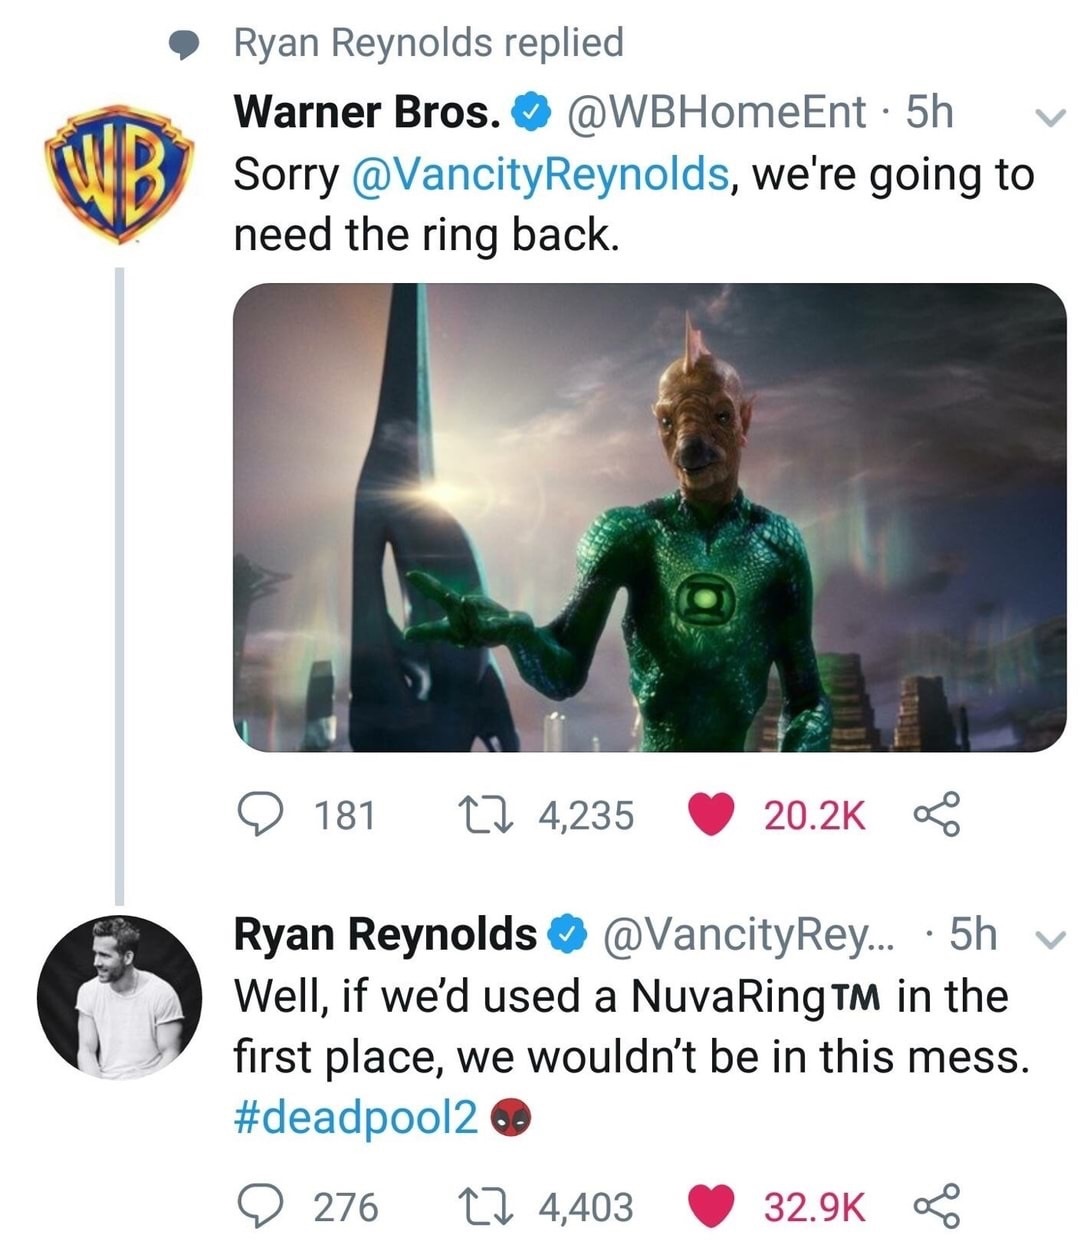 memes - ryan reynolds twitter warner bros - Ryan Reynolds replied Warner Bros. 5h v Sorry , we're going to need the ring back. 181 4,235 08 Ryan Reynolds ... 5h v Well, if we'd used a NuvaRing Tm in the first place, we wouldn't be in this mess. 276 22 4,4